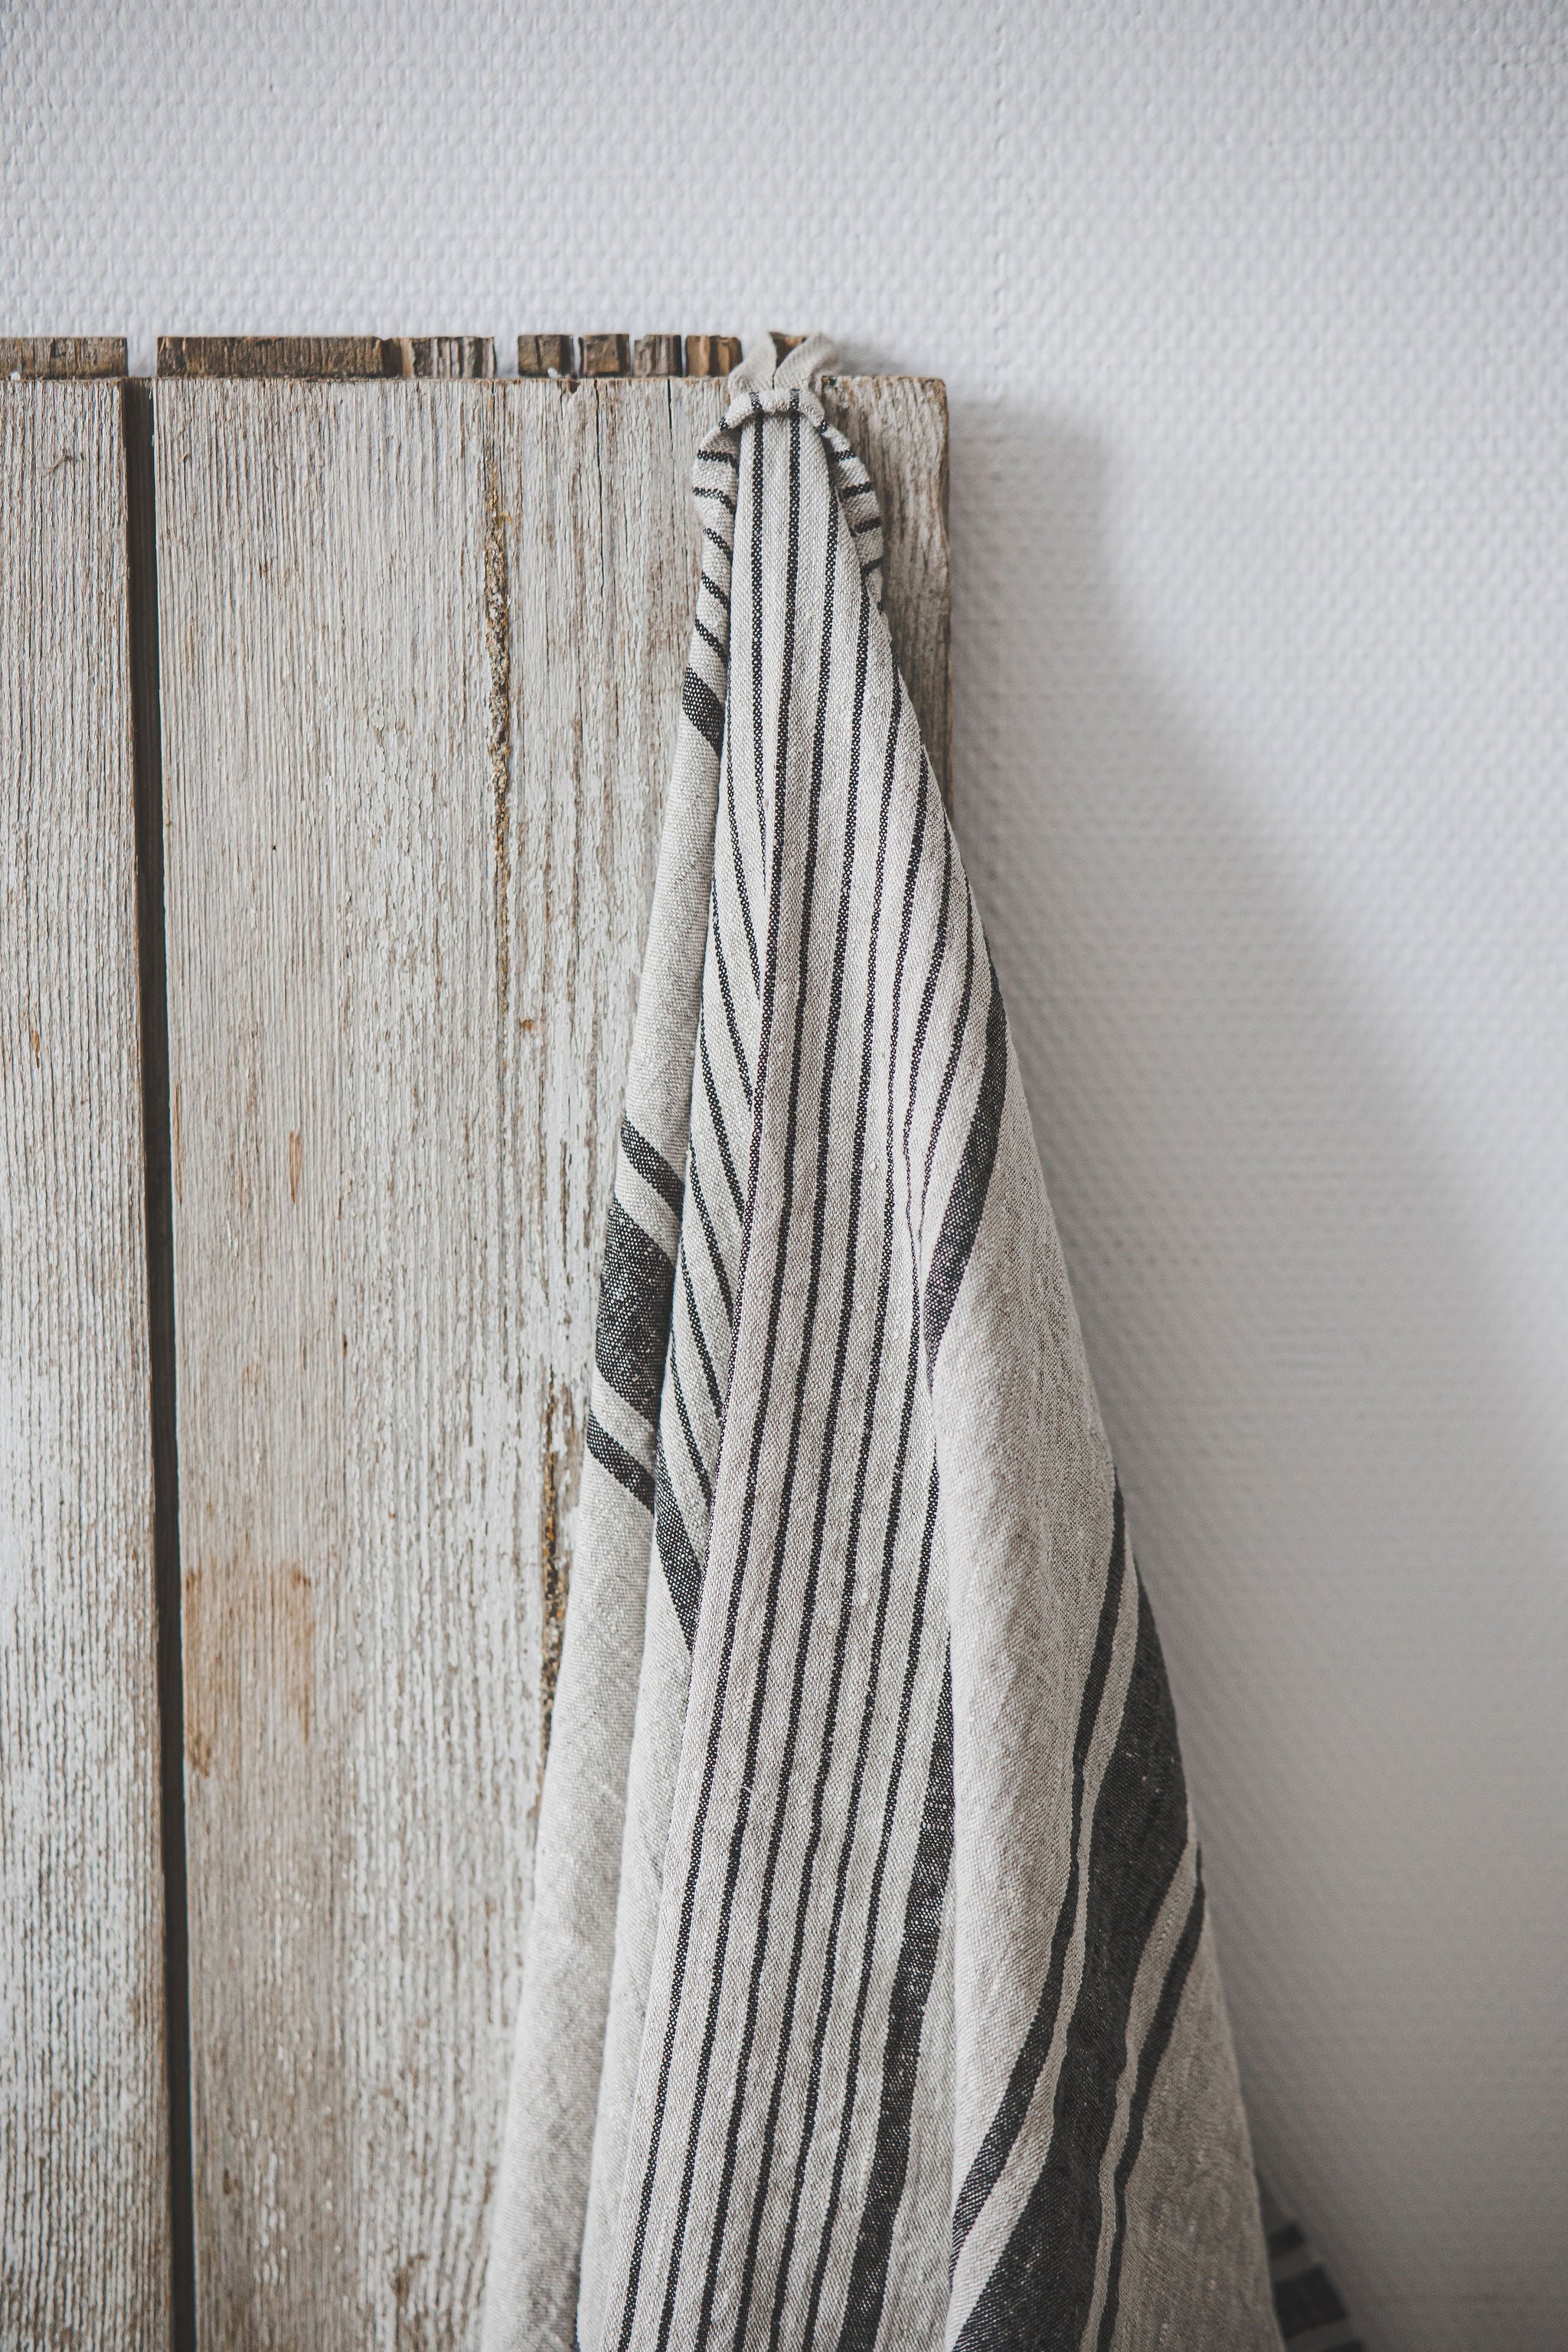 French style linen bath towels with black stripes